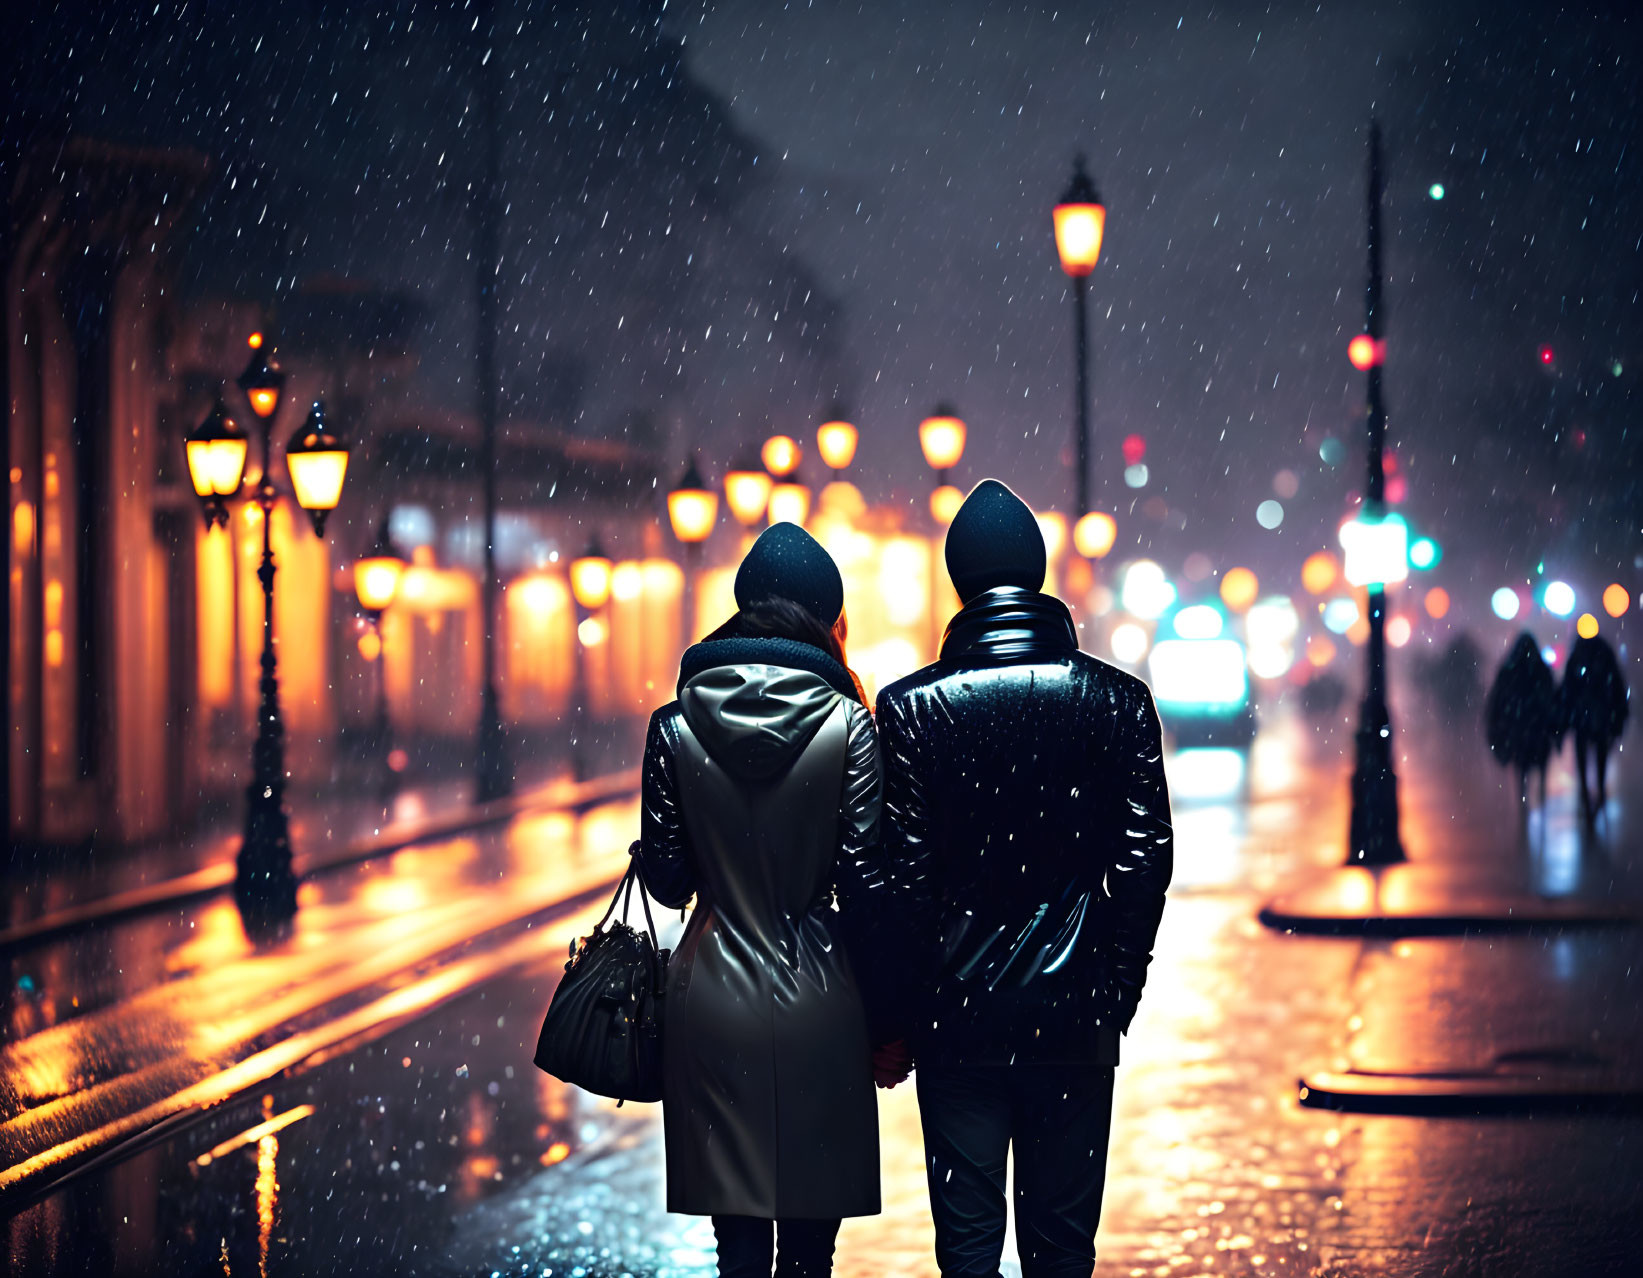 Nighttime city street scene with two people walking closely in rain and snow.